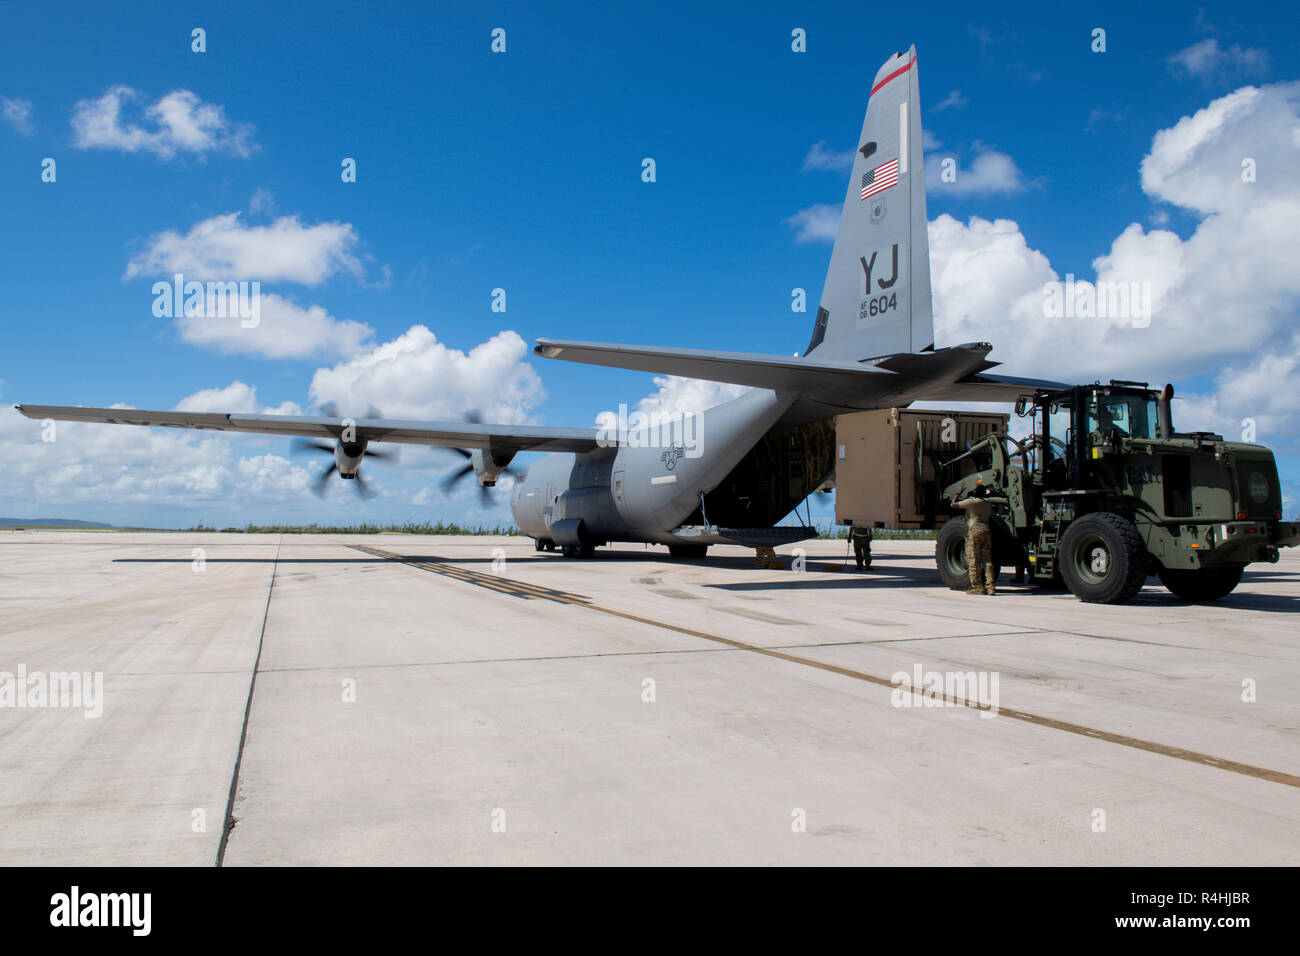 Cargo is loaded onto a C-130J Super Hercules, Nov. 27, 2018, at the Saipan International Airport, Saipan, Commonwealth of the Northern Mariana Islands. Service members from Joint Region Marianas and U.S. Indo-Pacific Command are providing Department of Defense support to the CNMI's civil and local officials as part of the Federal Emergency Management Agency-supported Super Typhoon Yutu recovery efforts. (U.S. Air Force Photo by Tech. Sgt. Joshua J. Garcia) Stock Photo